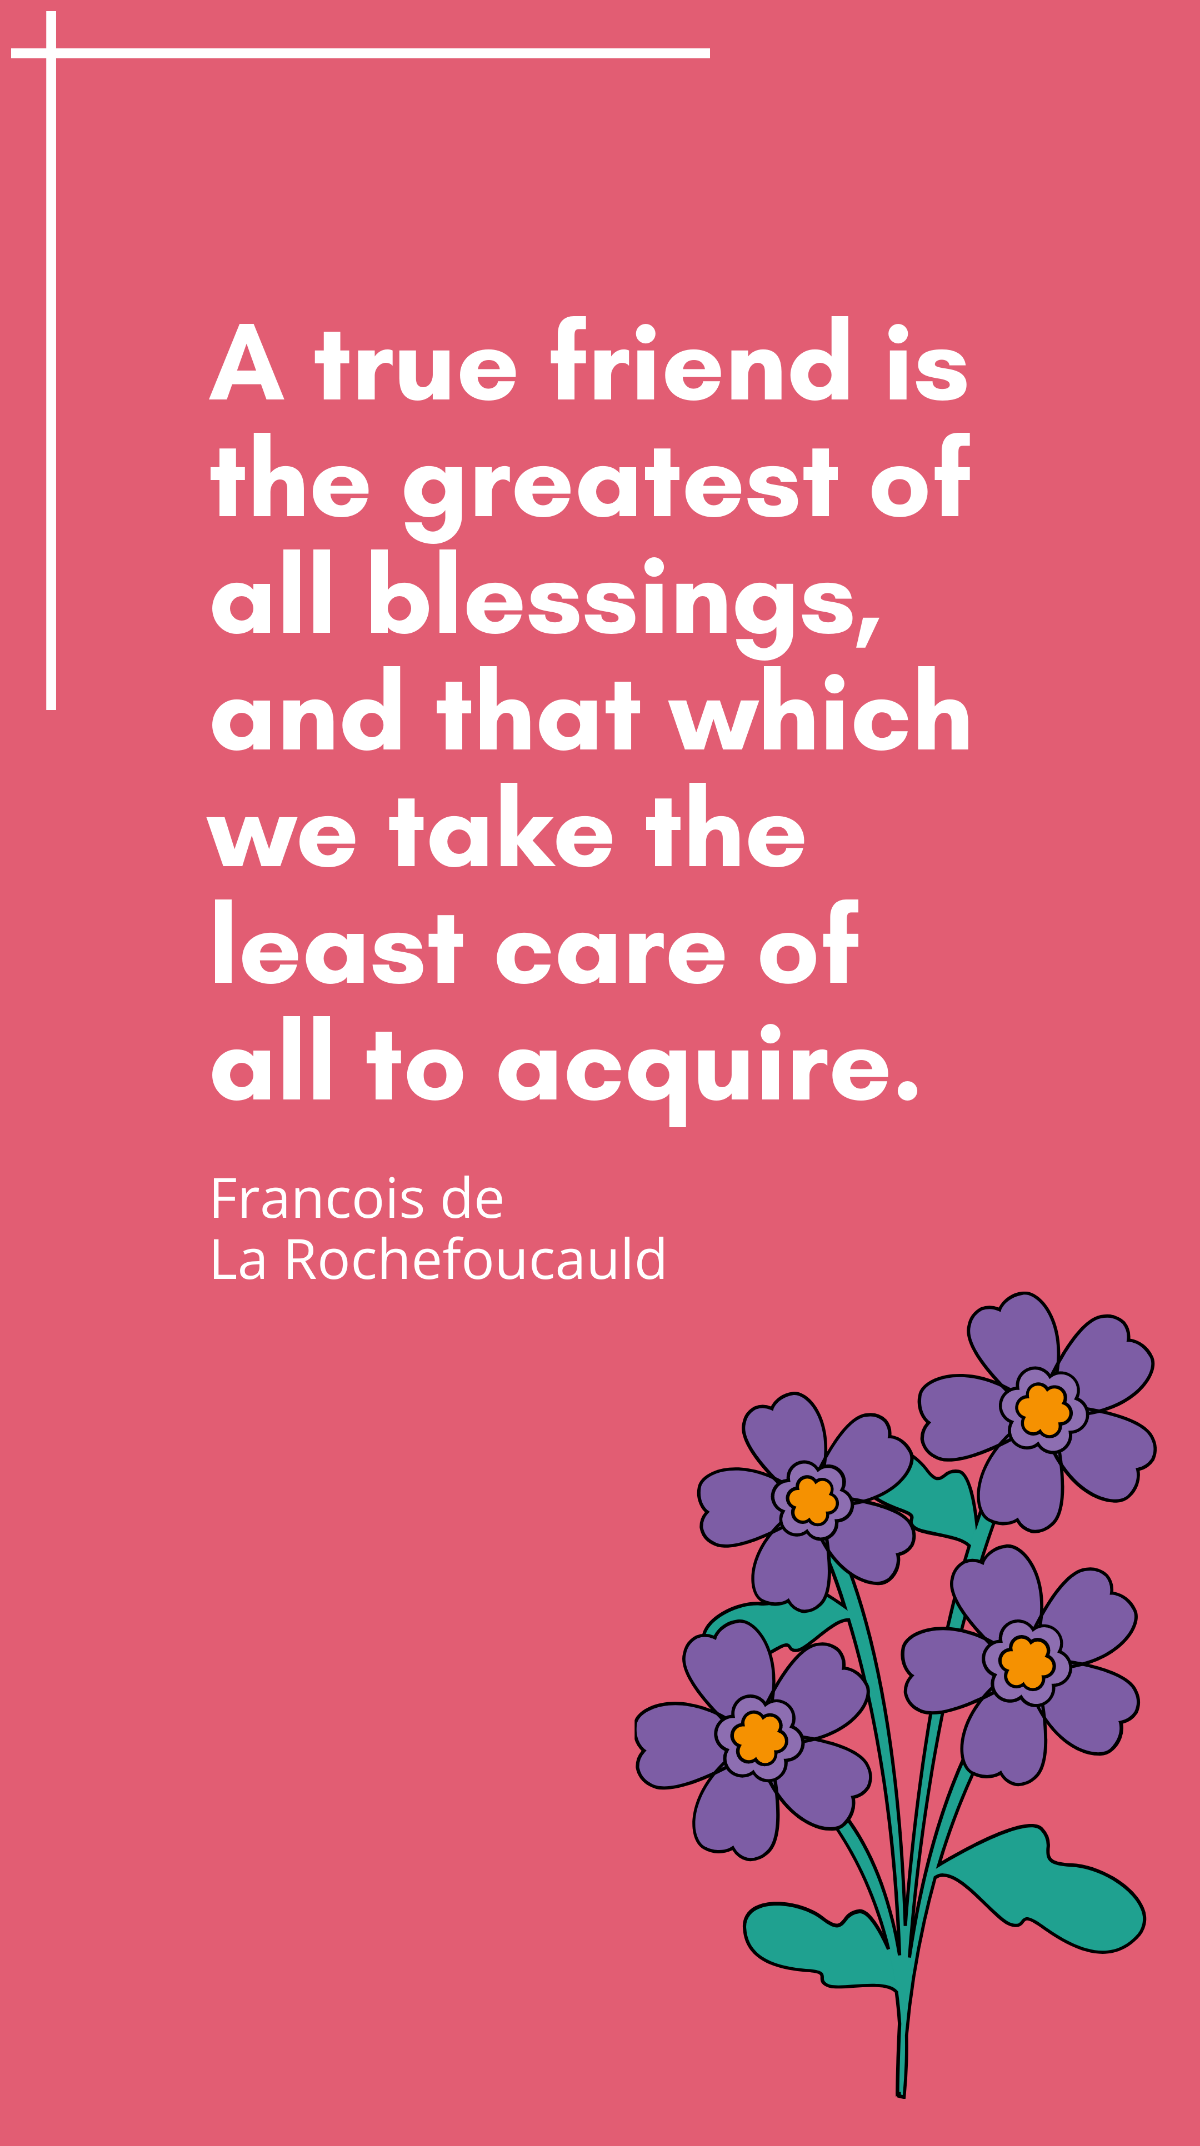 Francois de La Rochefoucauld - A true friend is the greatest of all blessings, and that which we take the least care of all to acquire. Template